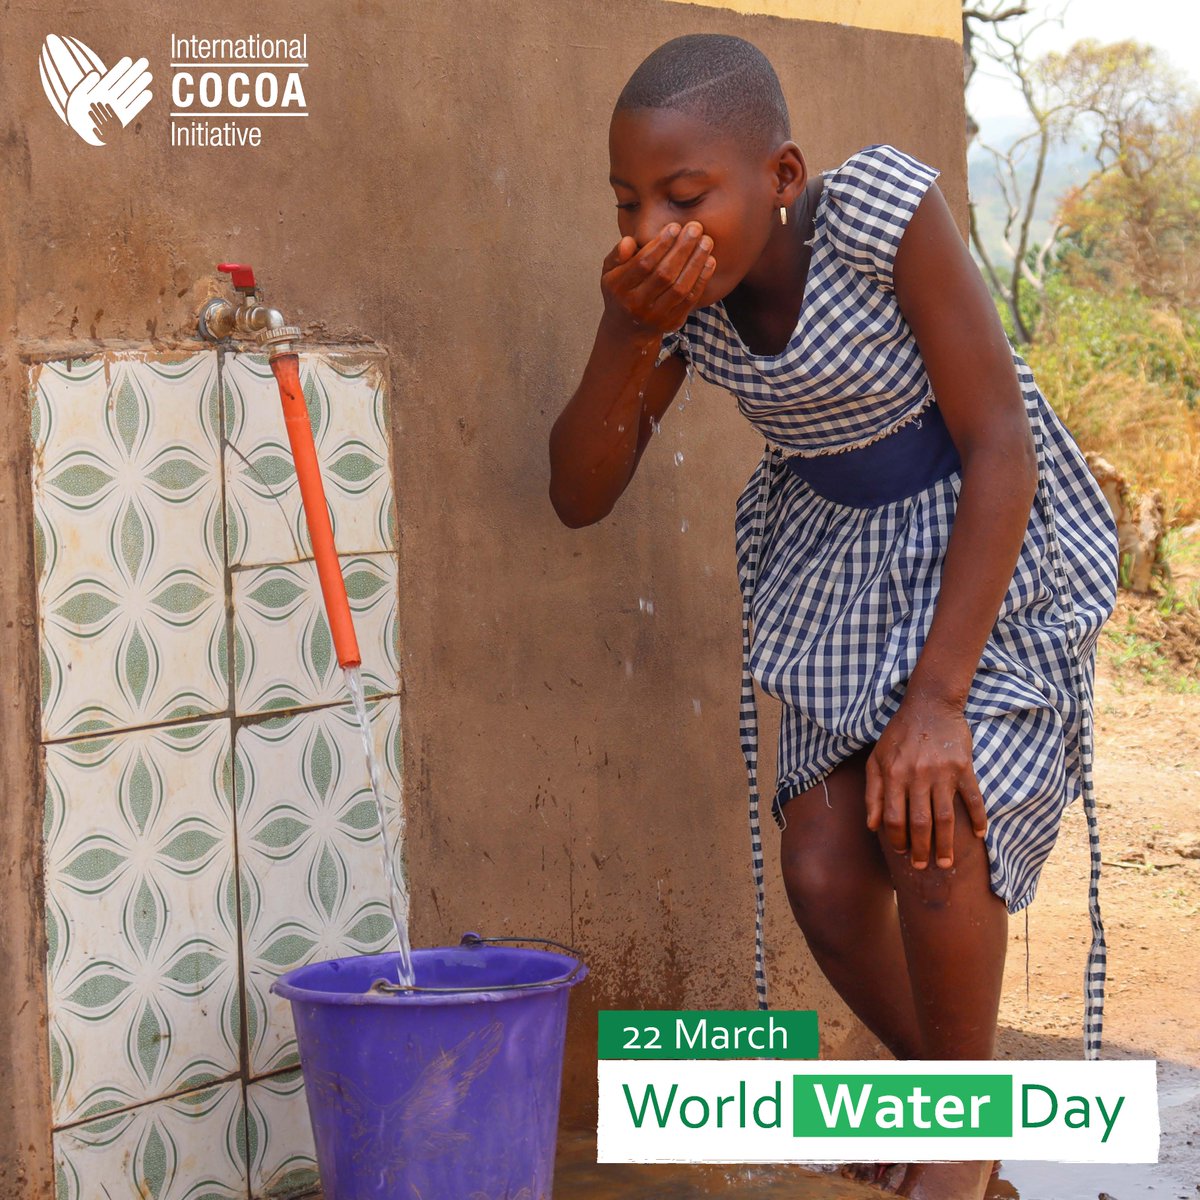 Water is a precious resource, a human right. At ICI we know that assisting cocoa communities in West Africa to have access to safe and clean water can aid in tackling #ChildLabour and creating a better future #WorldWaterDay